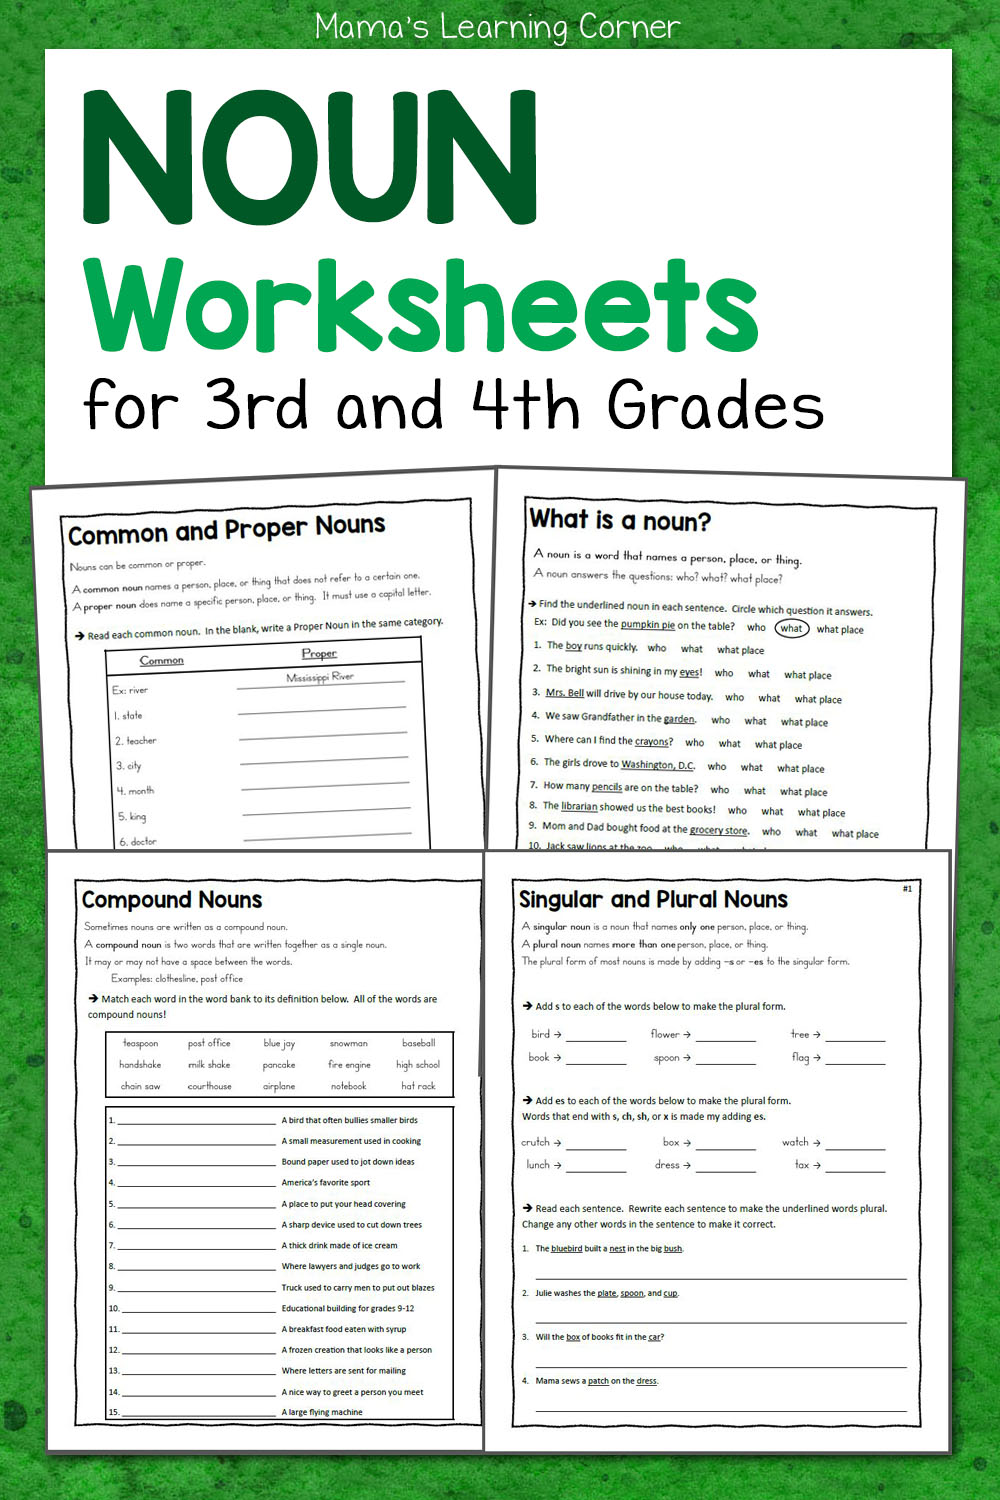 noun-worksheets-for-3rd-and-4th-grades-mamas-learning-corner